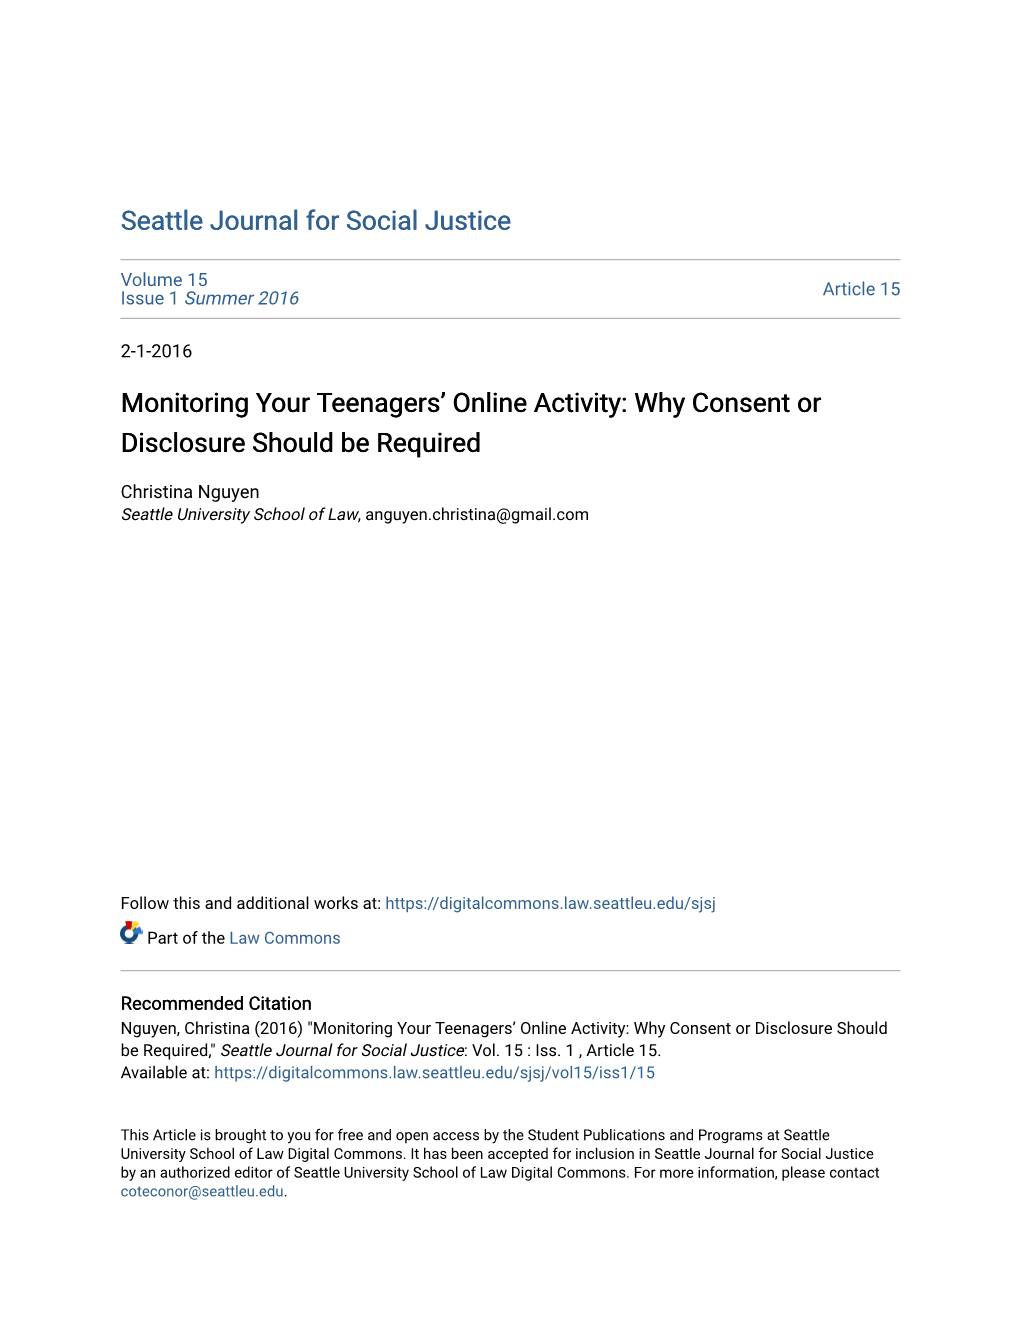 Monitoring Your Teenagersâ•Ž Online Activity: Why Consent Or Disclosure